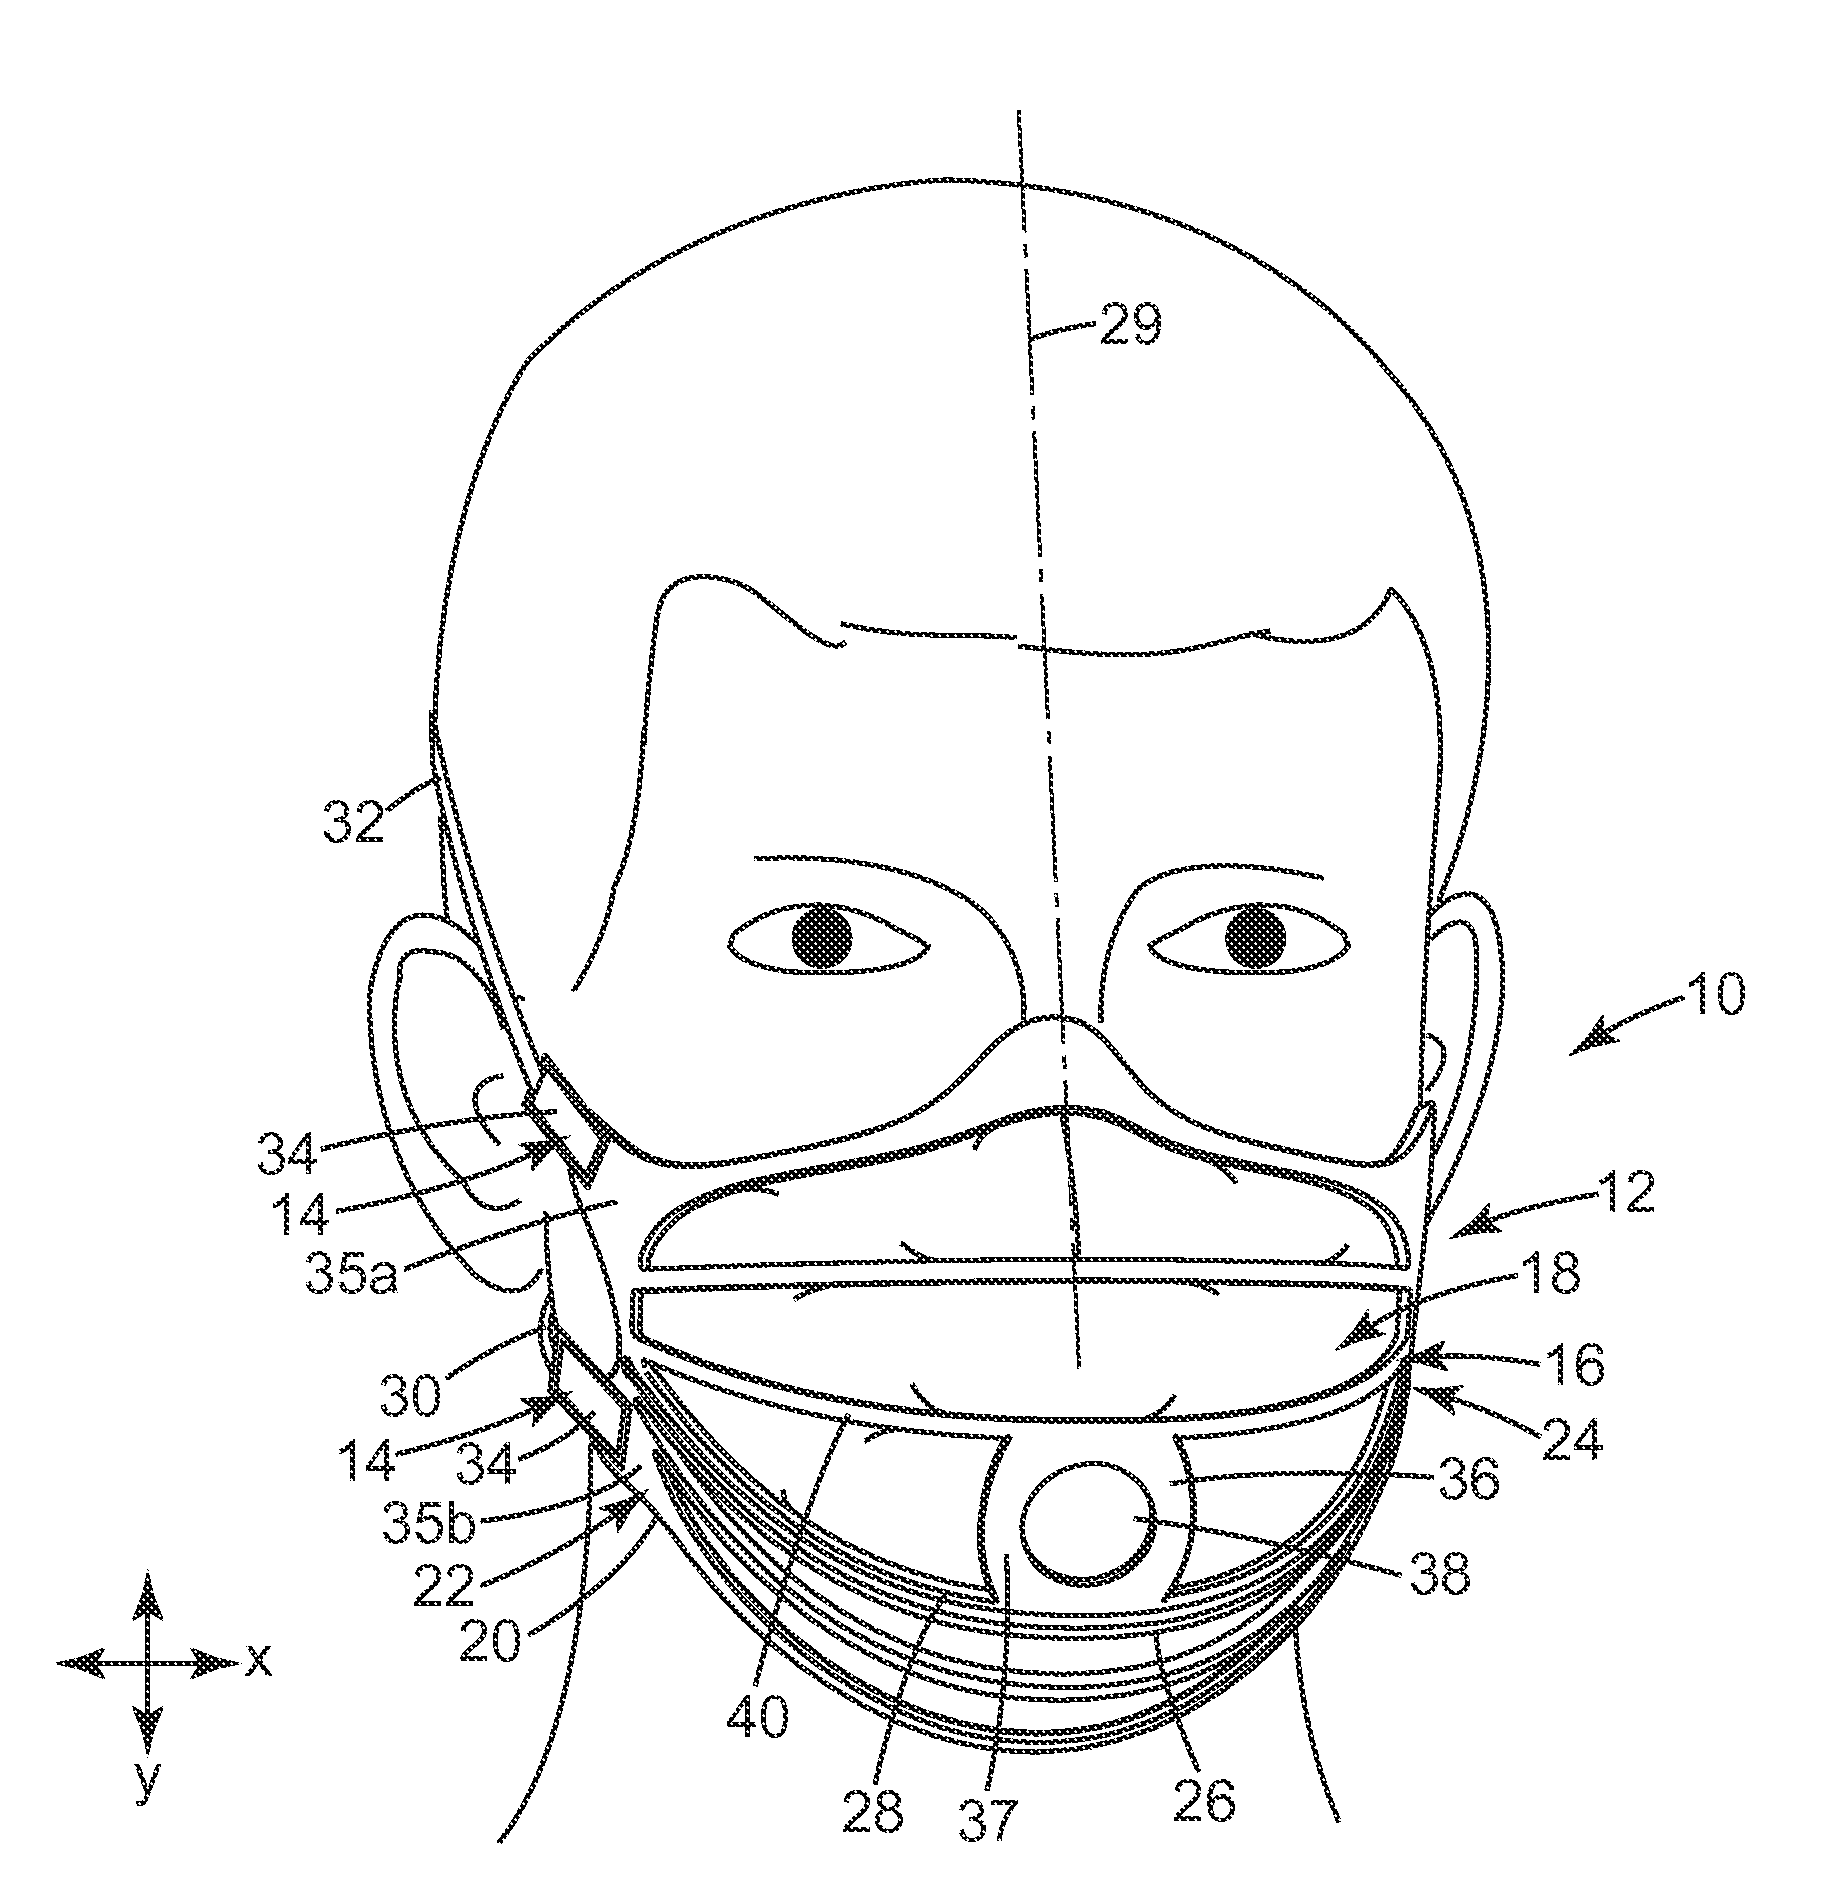 Filtering face-piece respirator support structure that has living hinges